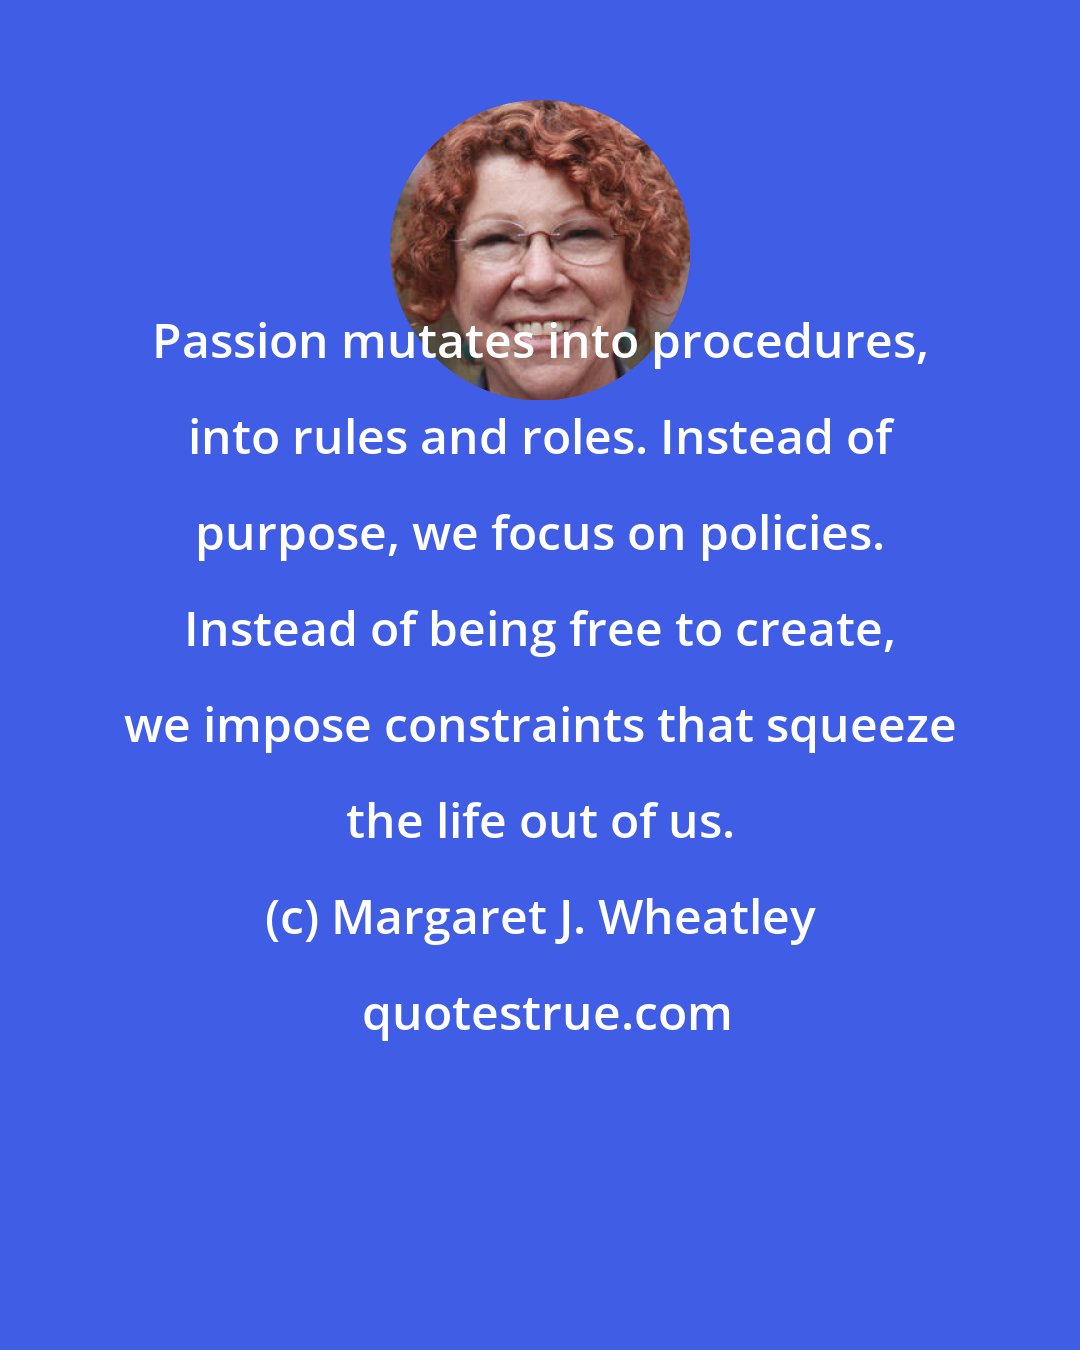 Margaret J. Wheatley: Passion mutates into procedures, into rules and roles. Instead of purpose, we focus on policies. Instead of being free to create, we impose constraints that squeeze the life out of us.